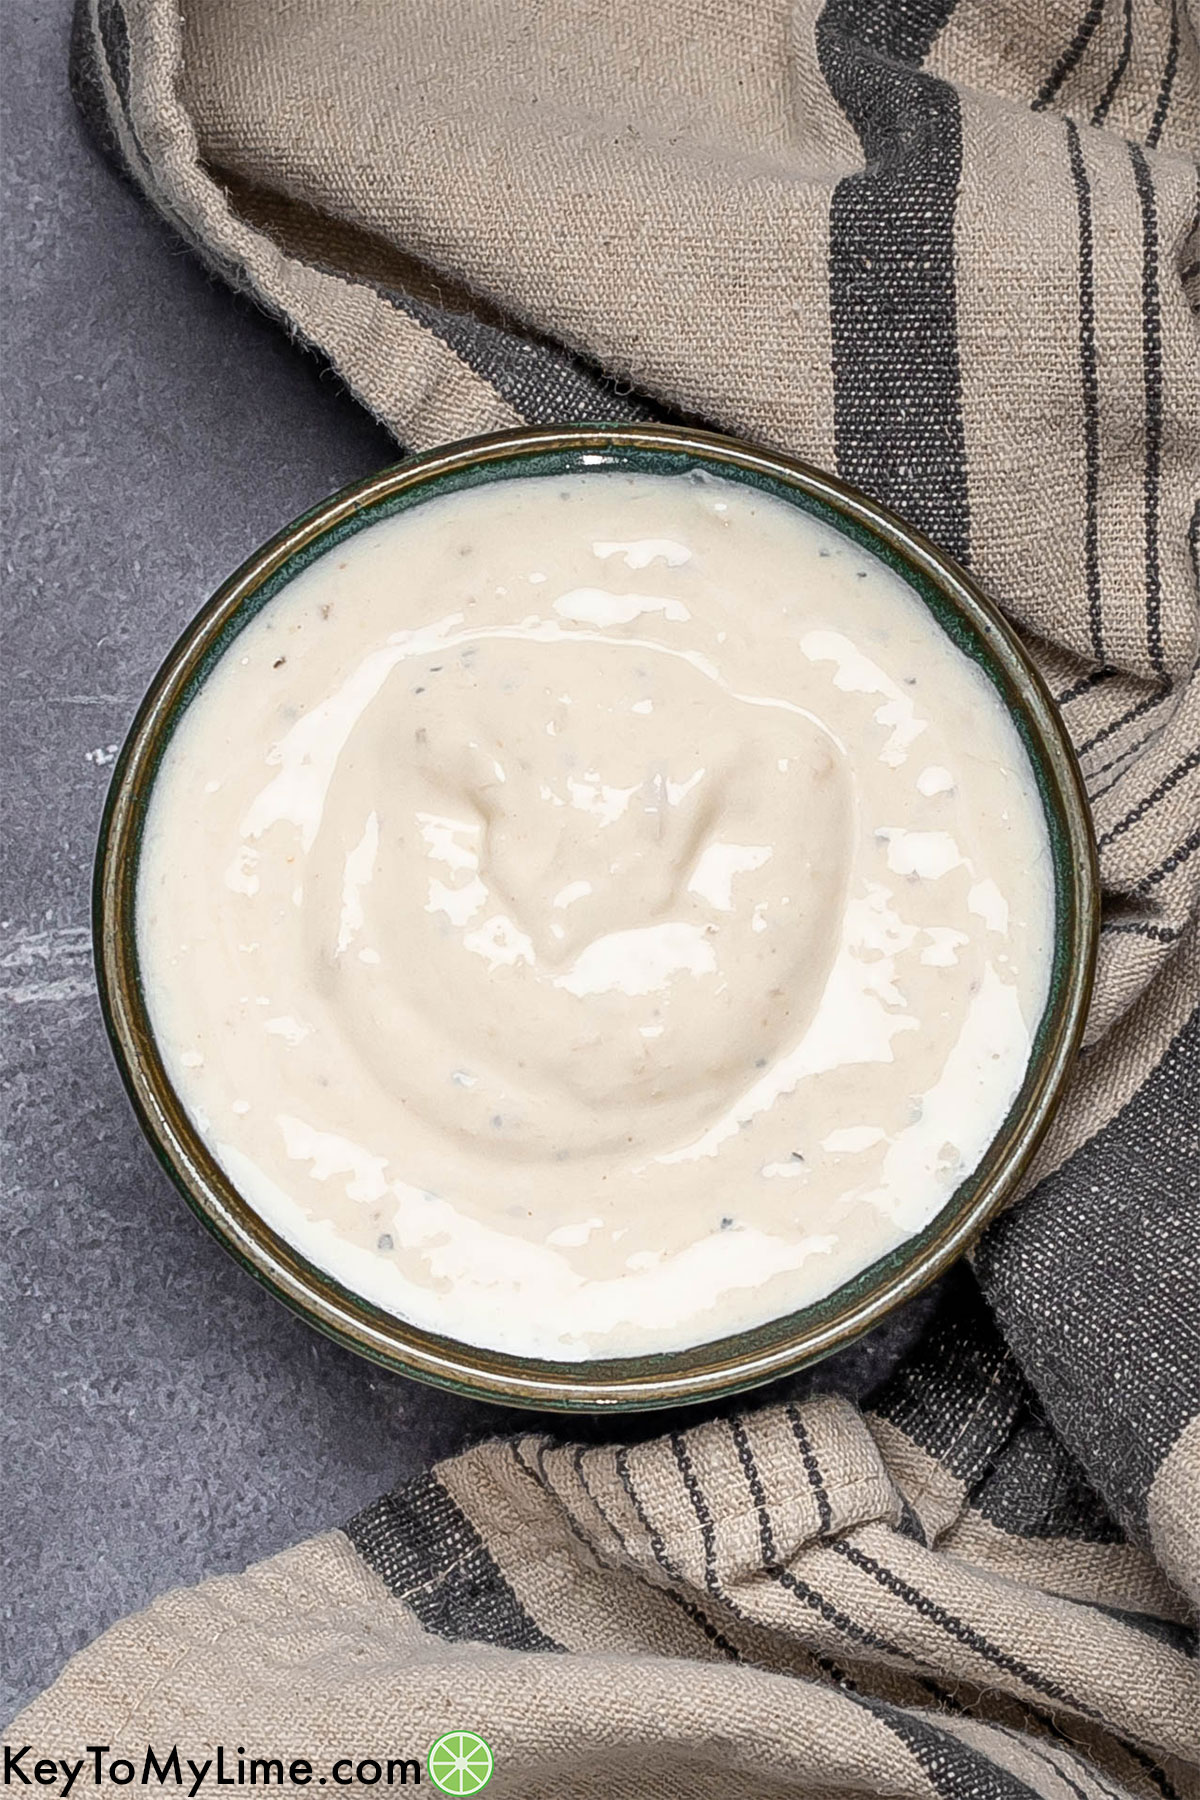 An image of freshly mixed horseradish sauce in a small bowl before garnishing.